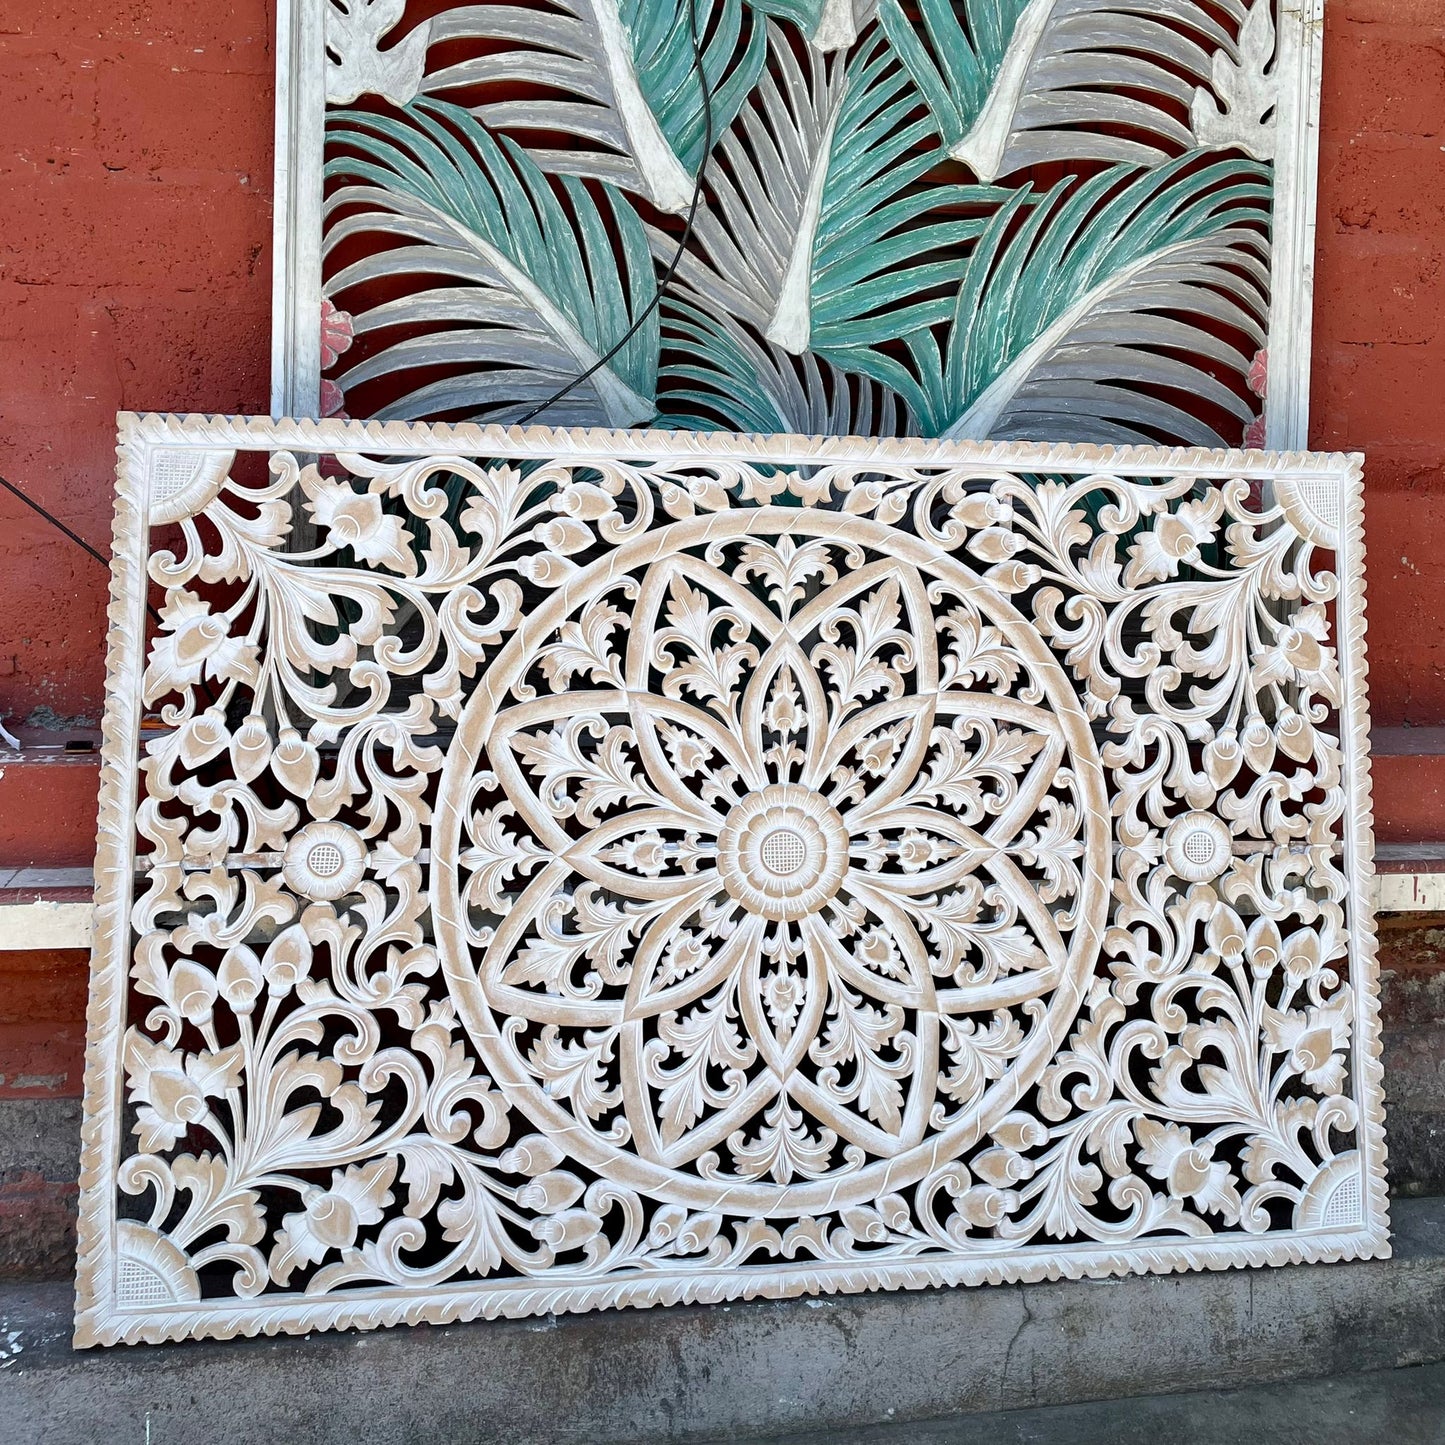 bed headboard kris antic wash bali design hand carved hand made home decorative house furniture wood material